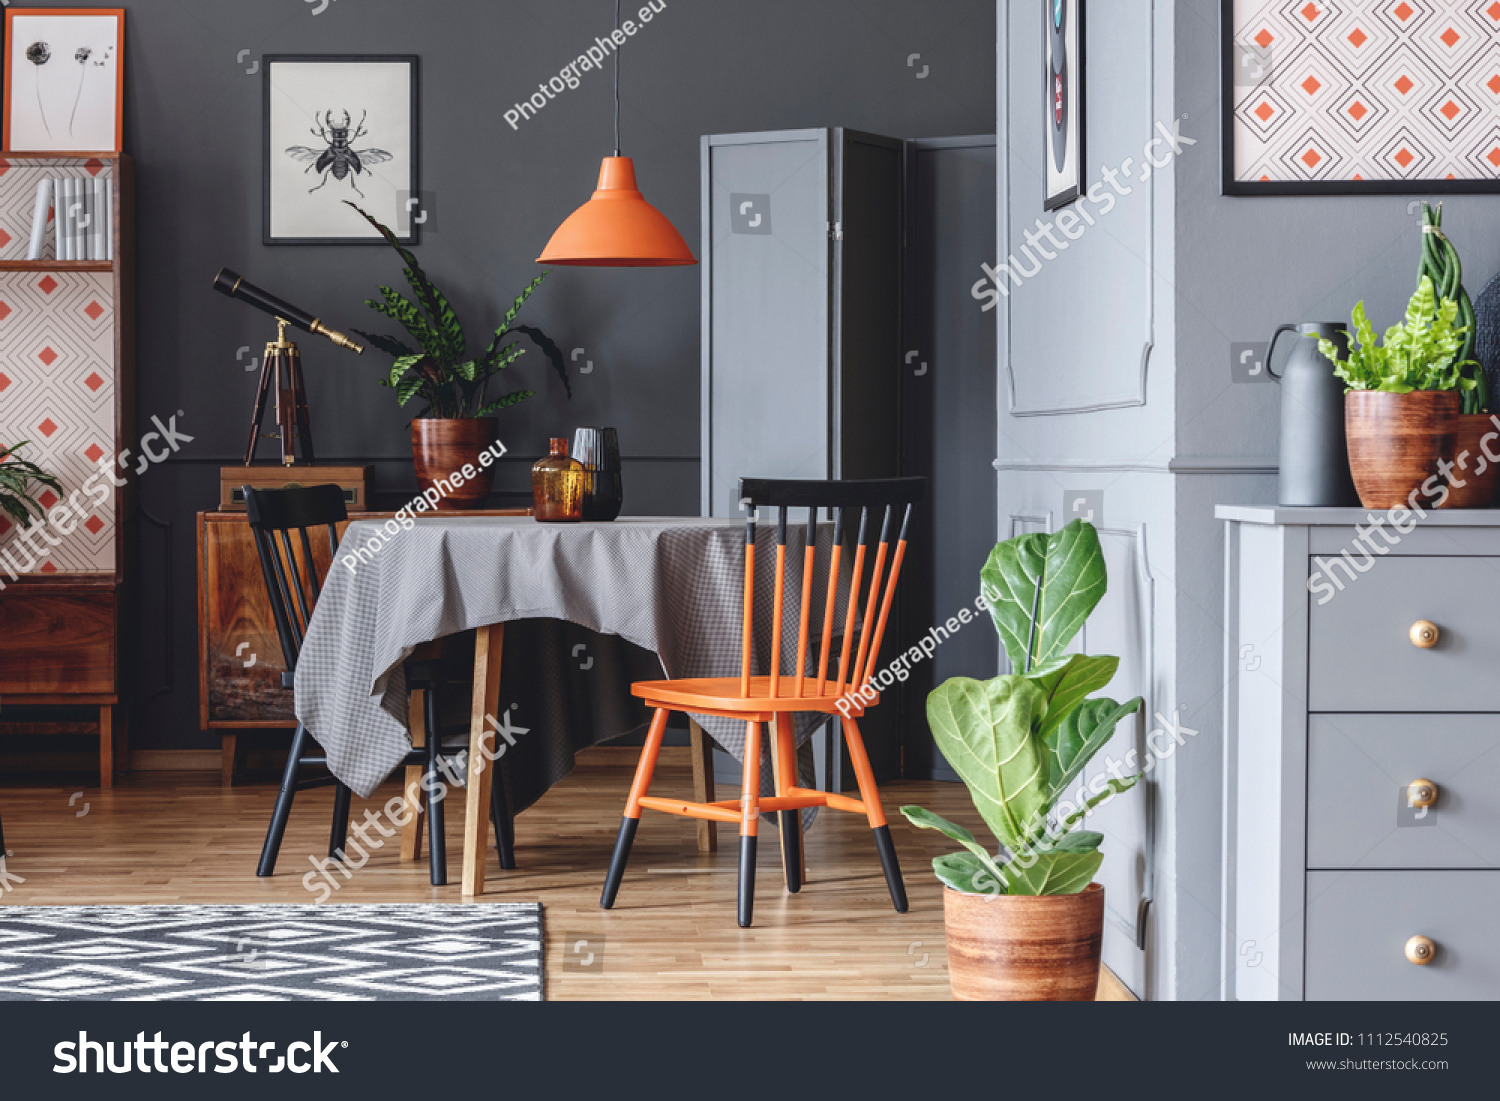 Old Fashioned Dining Room Interior With A Table Chairs Orange Lamp And Plants